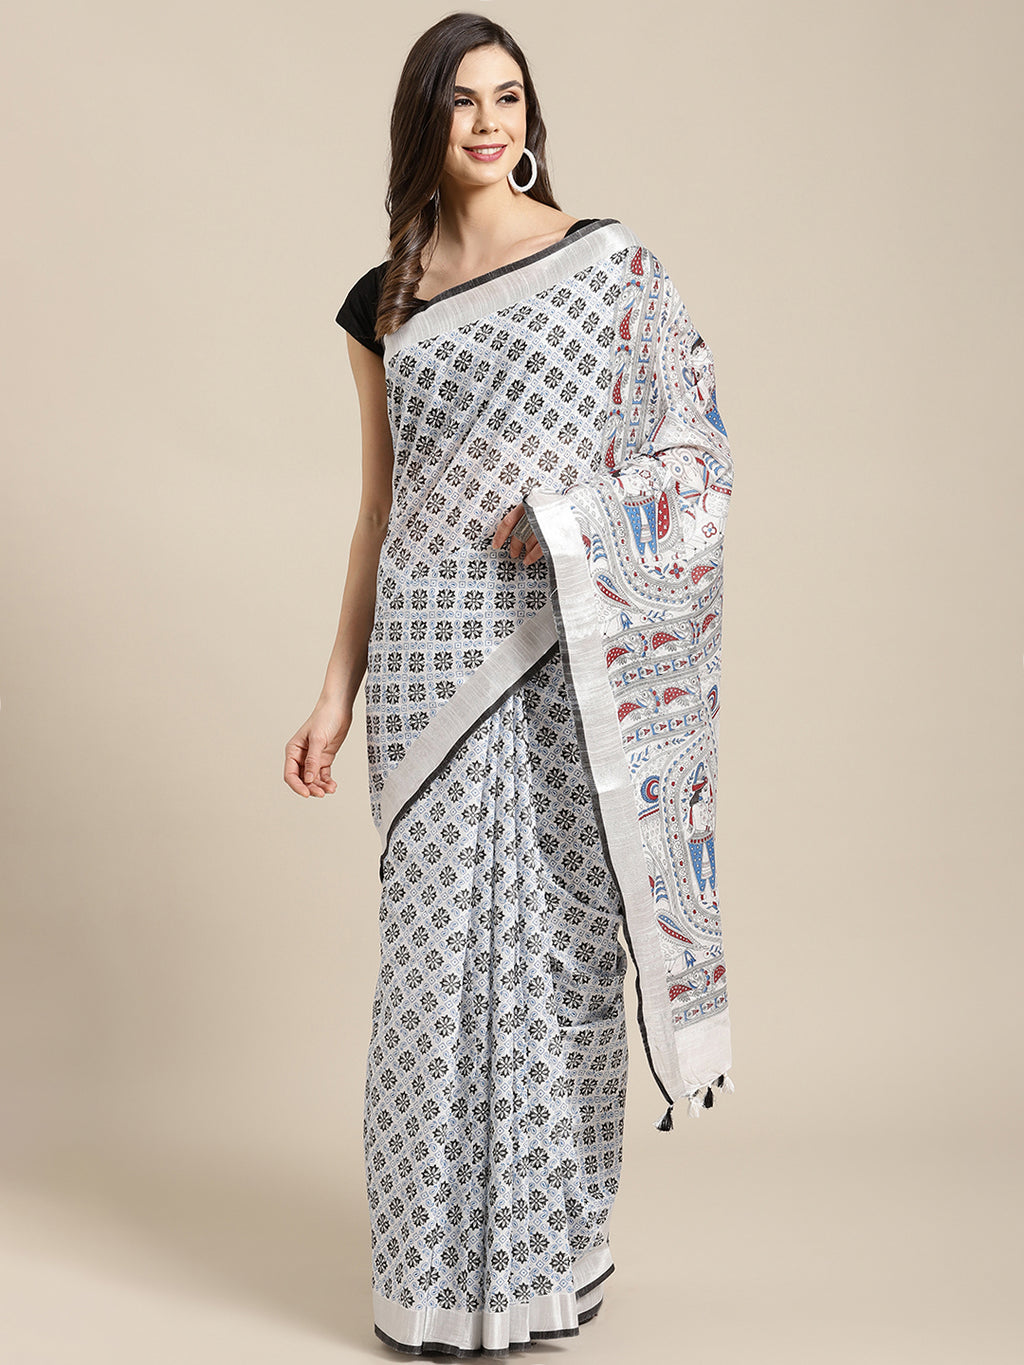 White and Blue, Kalakari India Bhagalpuri Linen Blend Woven Design Saree with Blouse ALBGSA0144-Saree-Kalakari India-ALBGSA0144-Cotton, Geographical Indication, Hand Crafted, Heritage Prints, Linen, Natural Dyes, Red, Sarees, Shibori, Sustainable Fabrics, Woven, Yellow-[Linen,Ethnic,wear,Fashionista,Handloom,Handicraft,Indigo,blockprint,block,print,Cotton,Chanderi,Blue, latest,classy,party,bollywood,trendy,summer,style,traditional,formal,elegant,unique,style,hand,block,print, dabu,booti,gift,pre